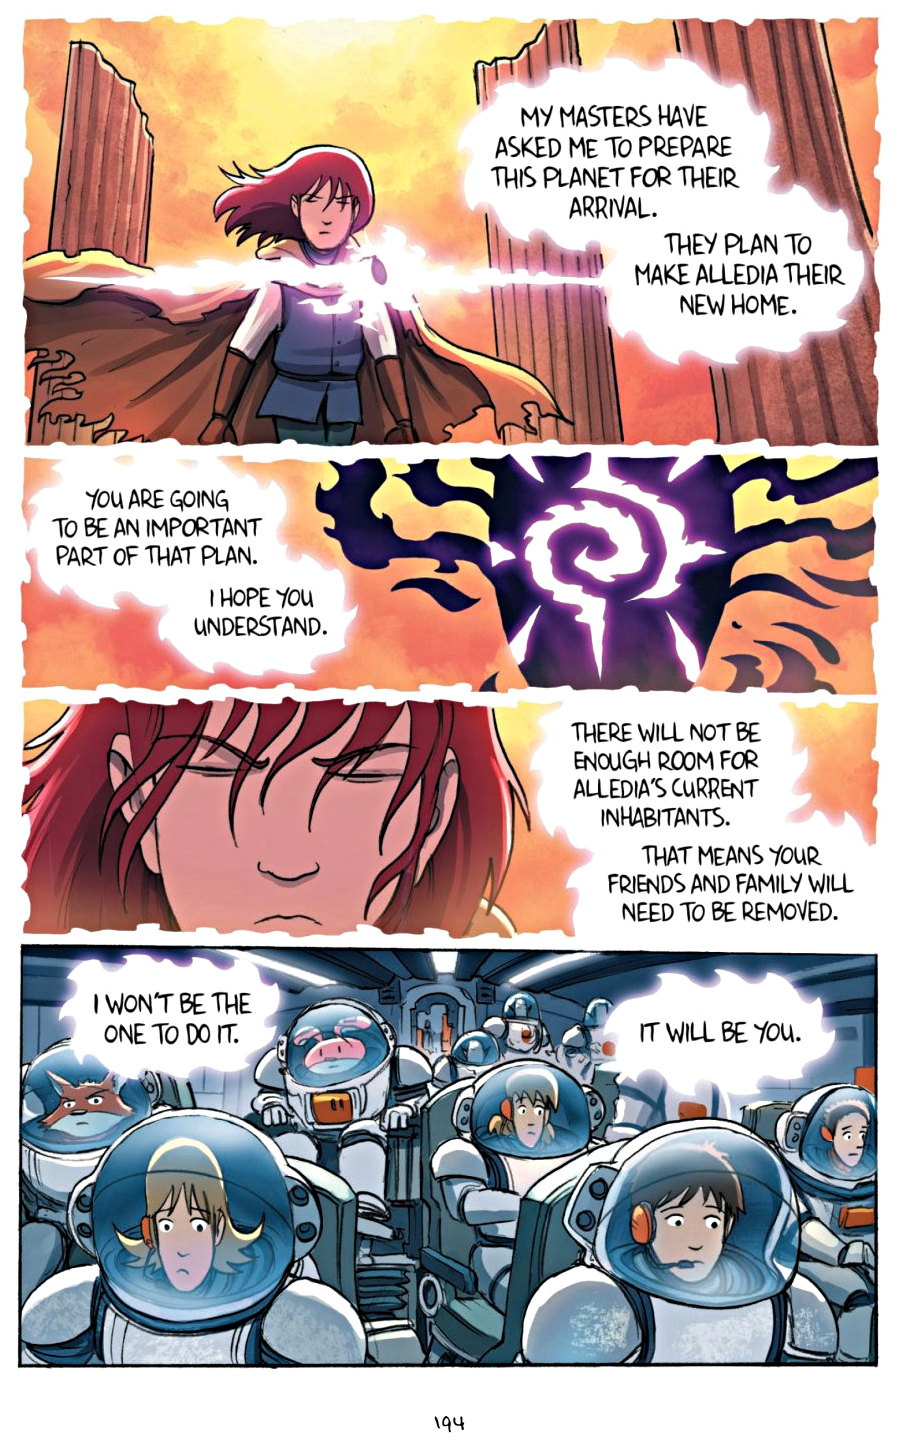 page 194 of amulet 7 firelight graphic novel